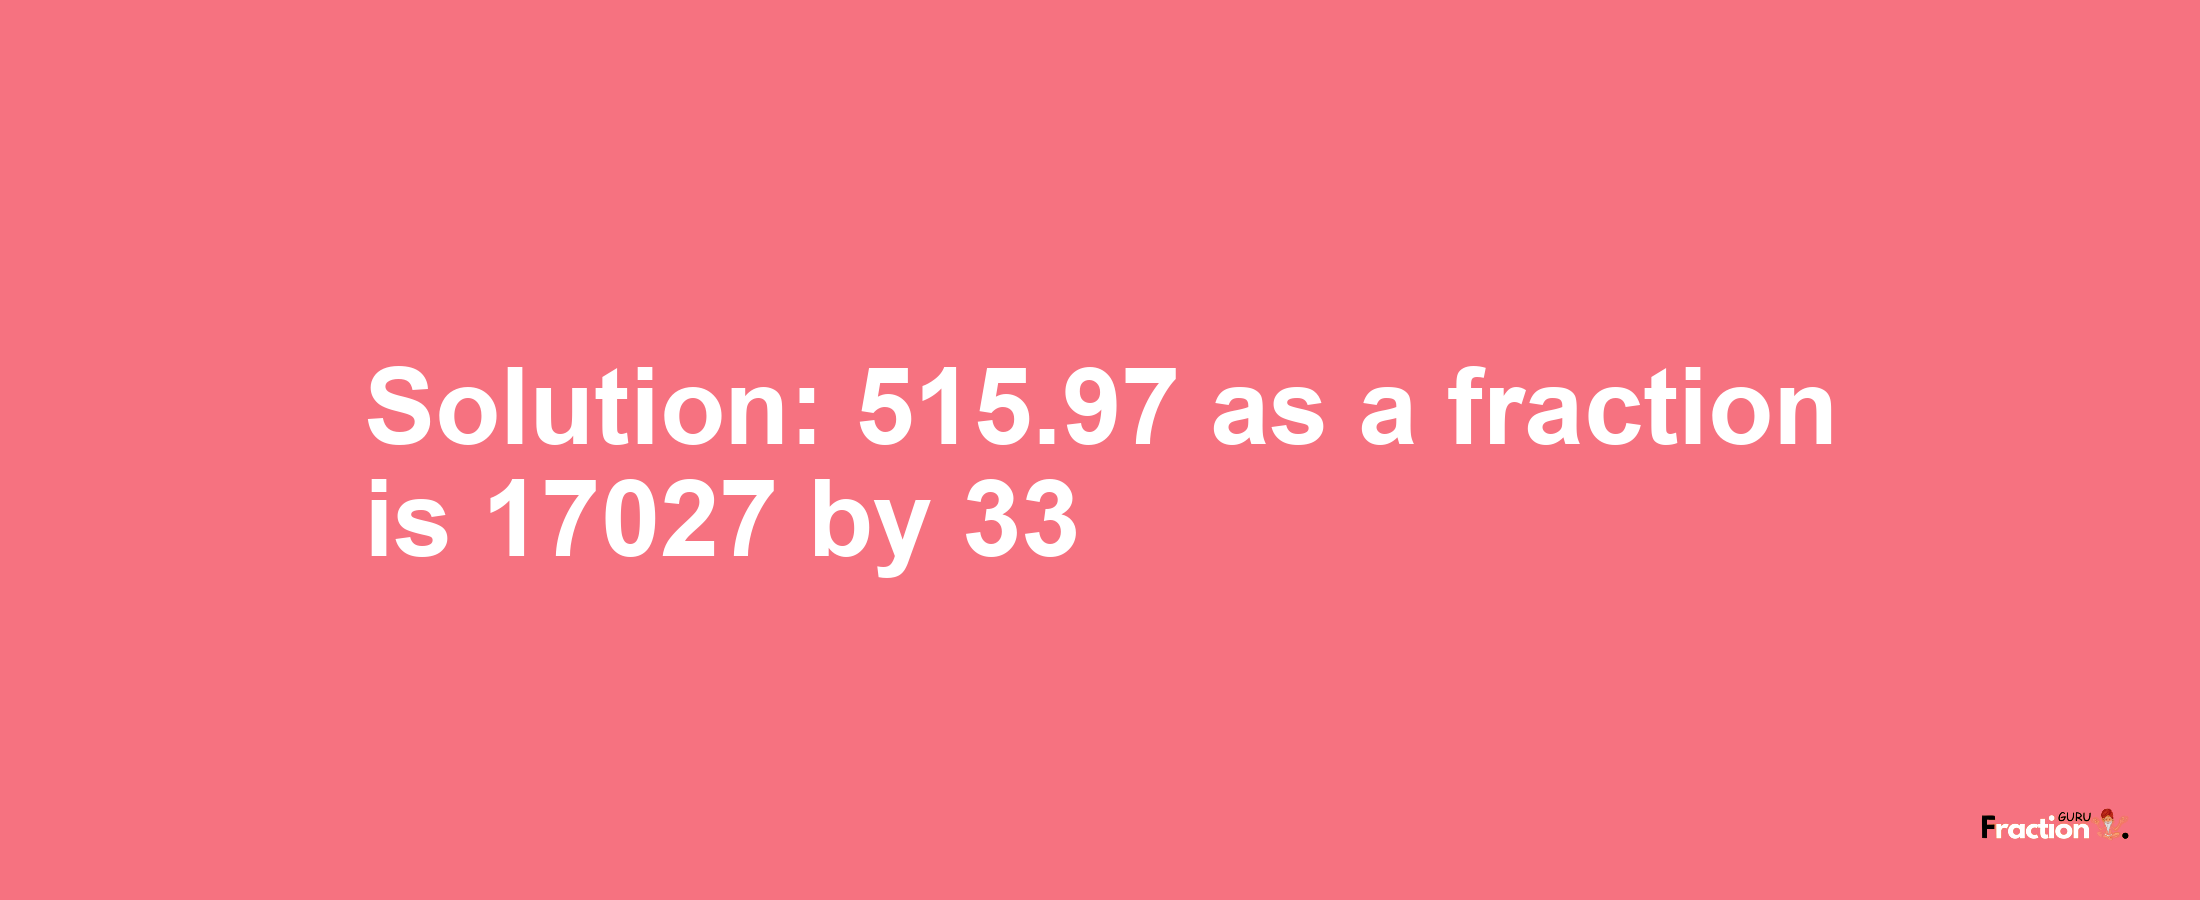 Solution:515.97 as a fraction is 17027/33